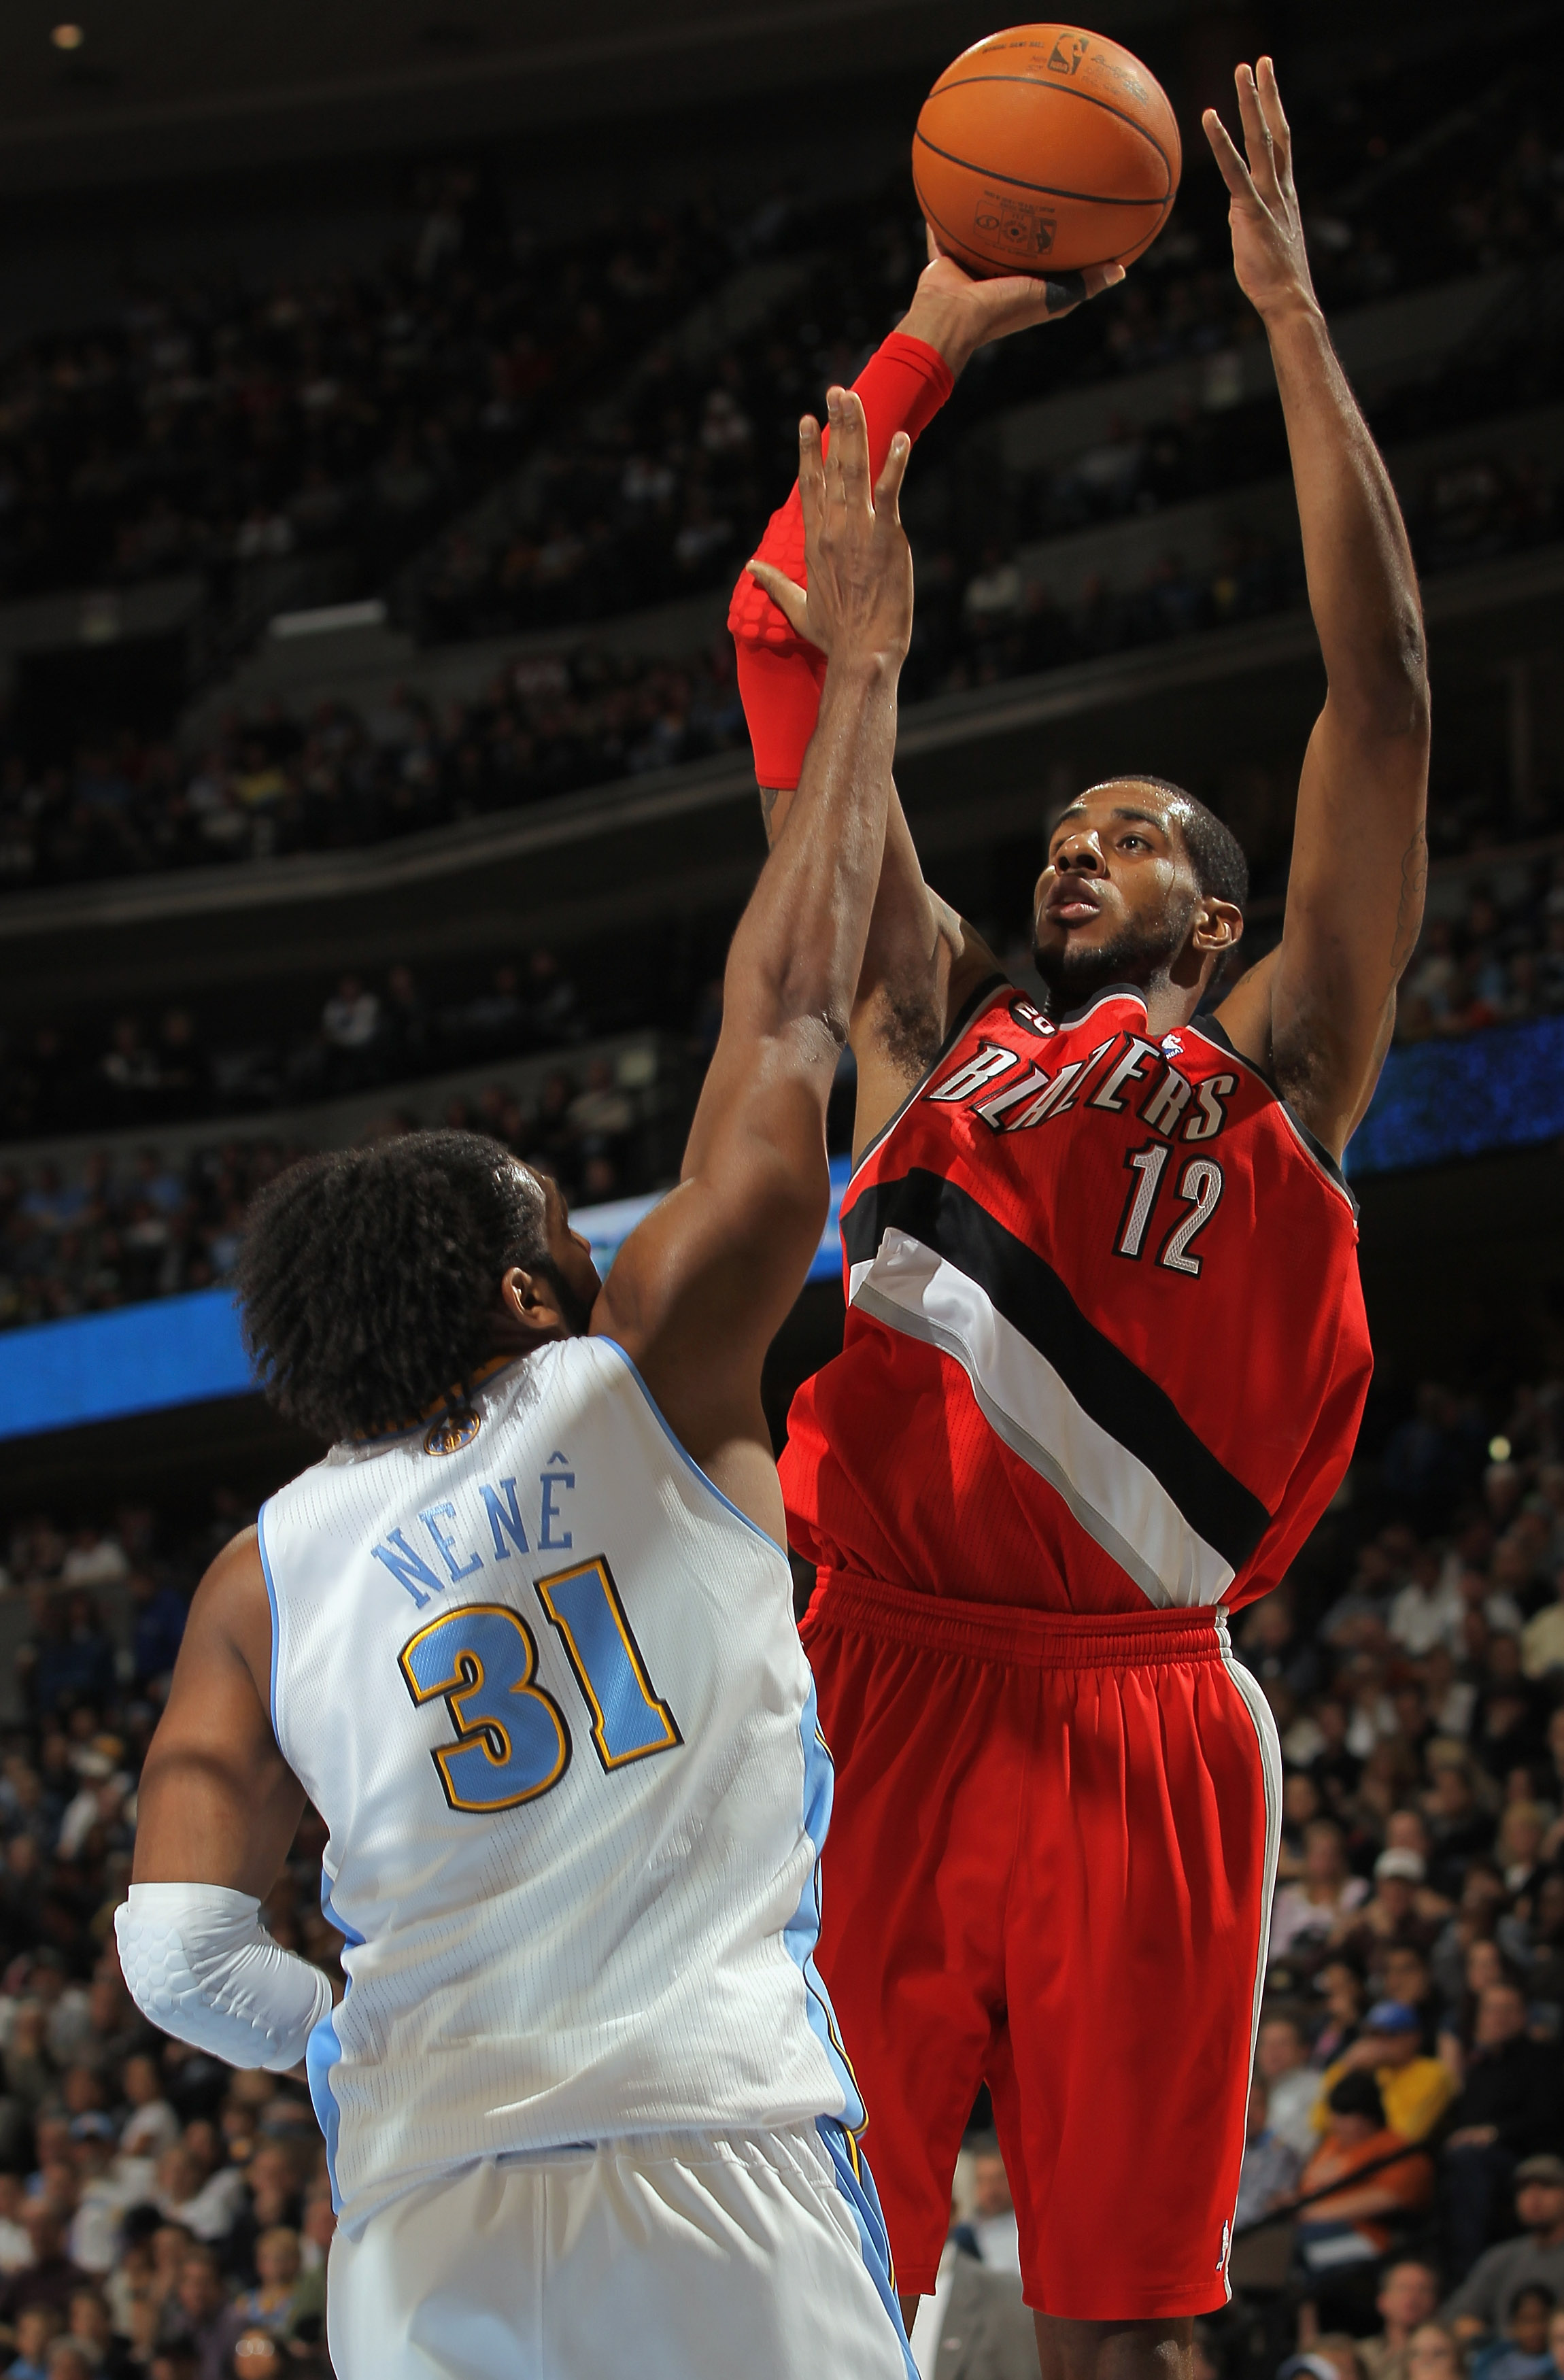 DENVER - DECEMBER 28:  LaMarcus Aldridge #12 of the Portland Trail Blazers takes a shot over Nene #31 of the Denver Nuggets at Pepsi Center on December 28, 2010 in Denver, Colorado. NOTE TO USER: User expressly acknowledges and agrees that, by downloading